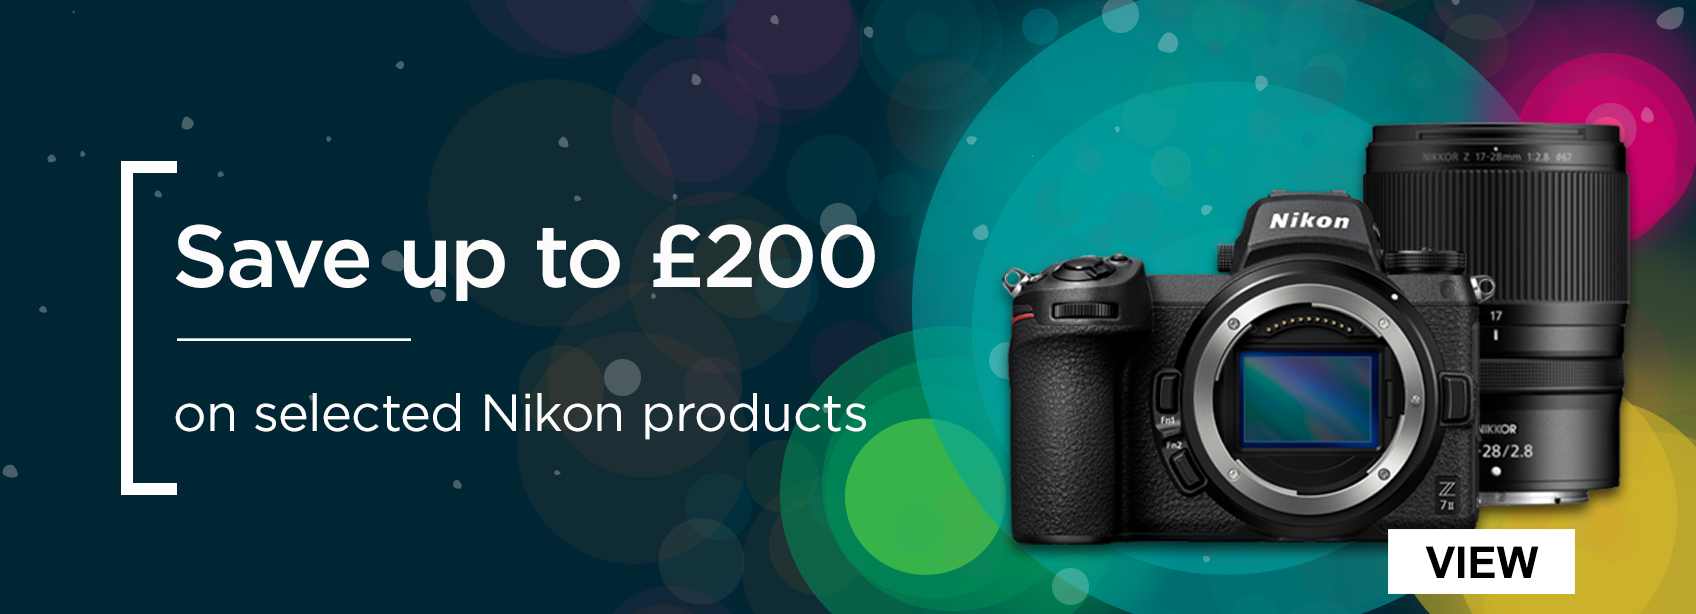 Save up to £200 on selected Nikon products